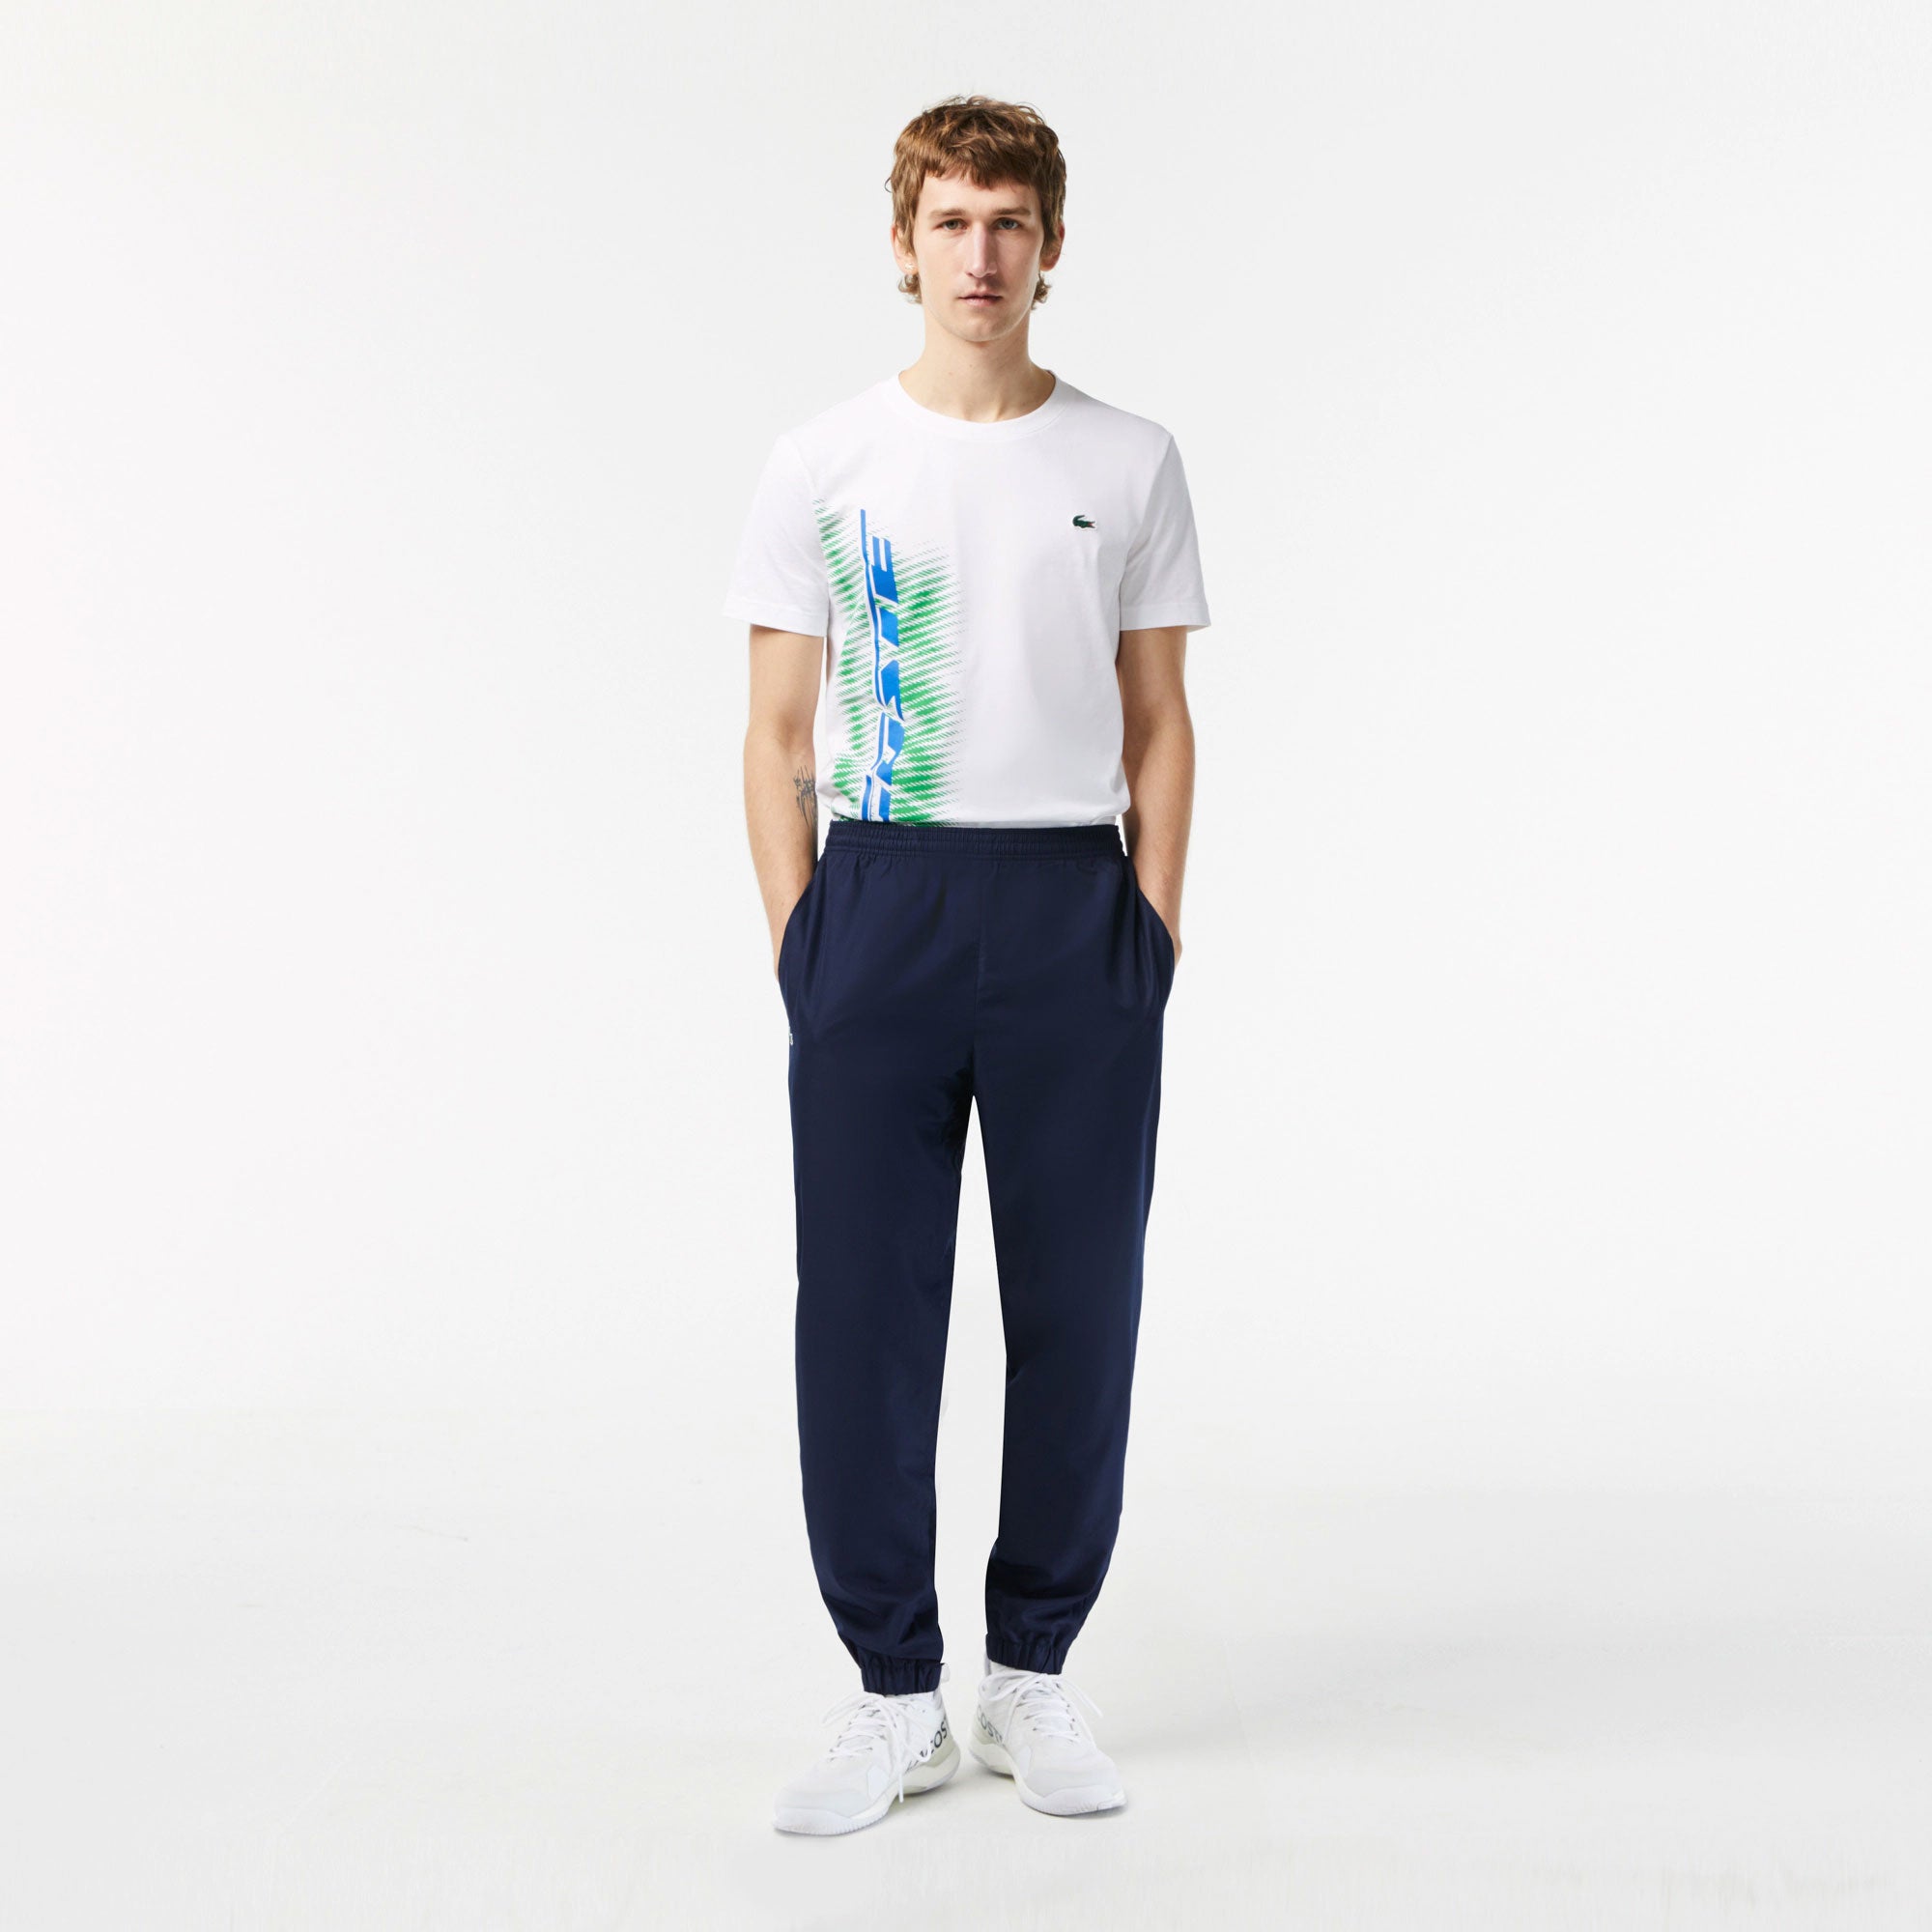 Lacoste Printed Trousers for Women sale - discounted price | FASHIOLA INDIA